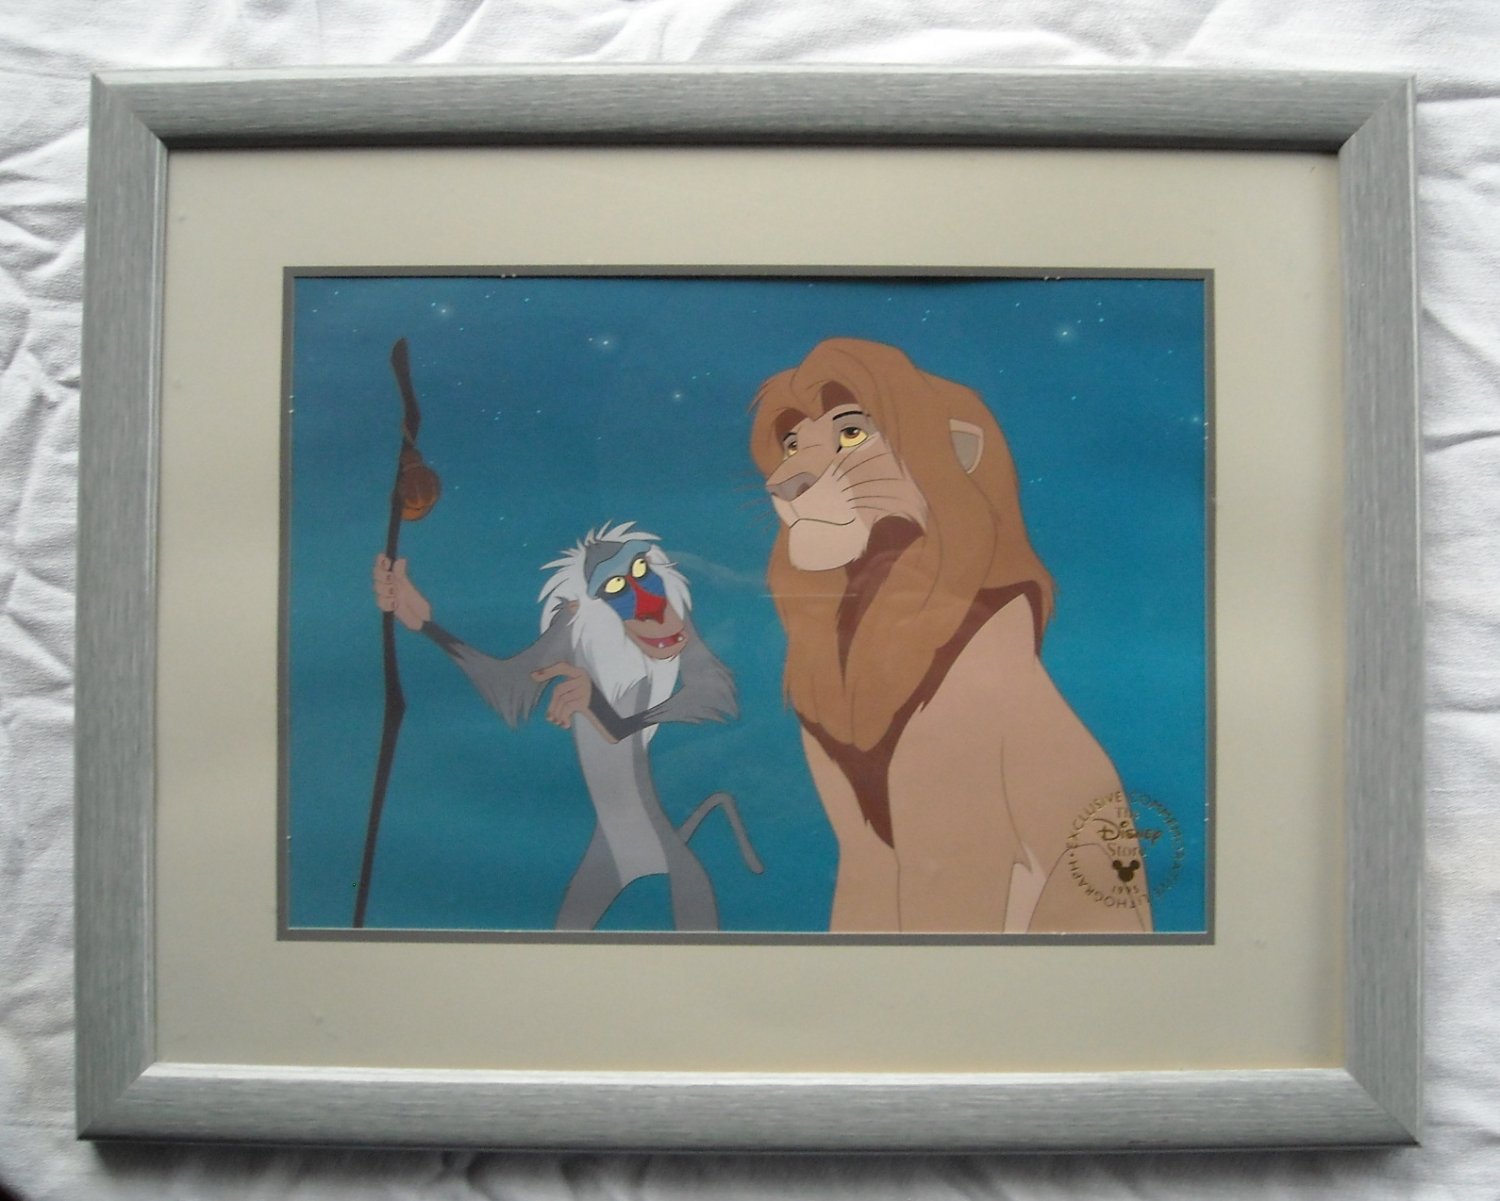 Walt Disney Exclusive Commemorative Lithograph The Lion King Framed 1995 Are Disney Lithographs Worth Any Money